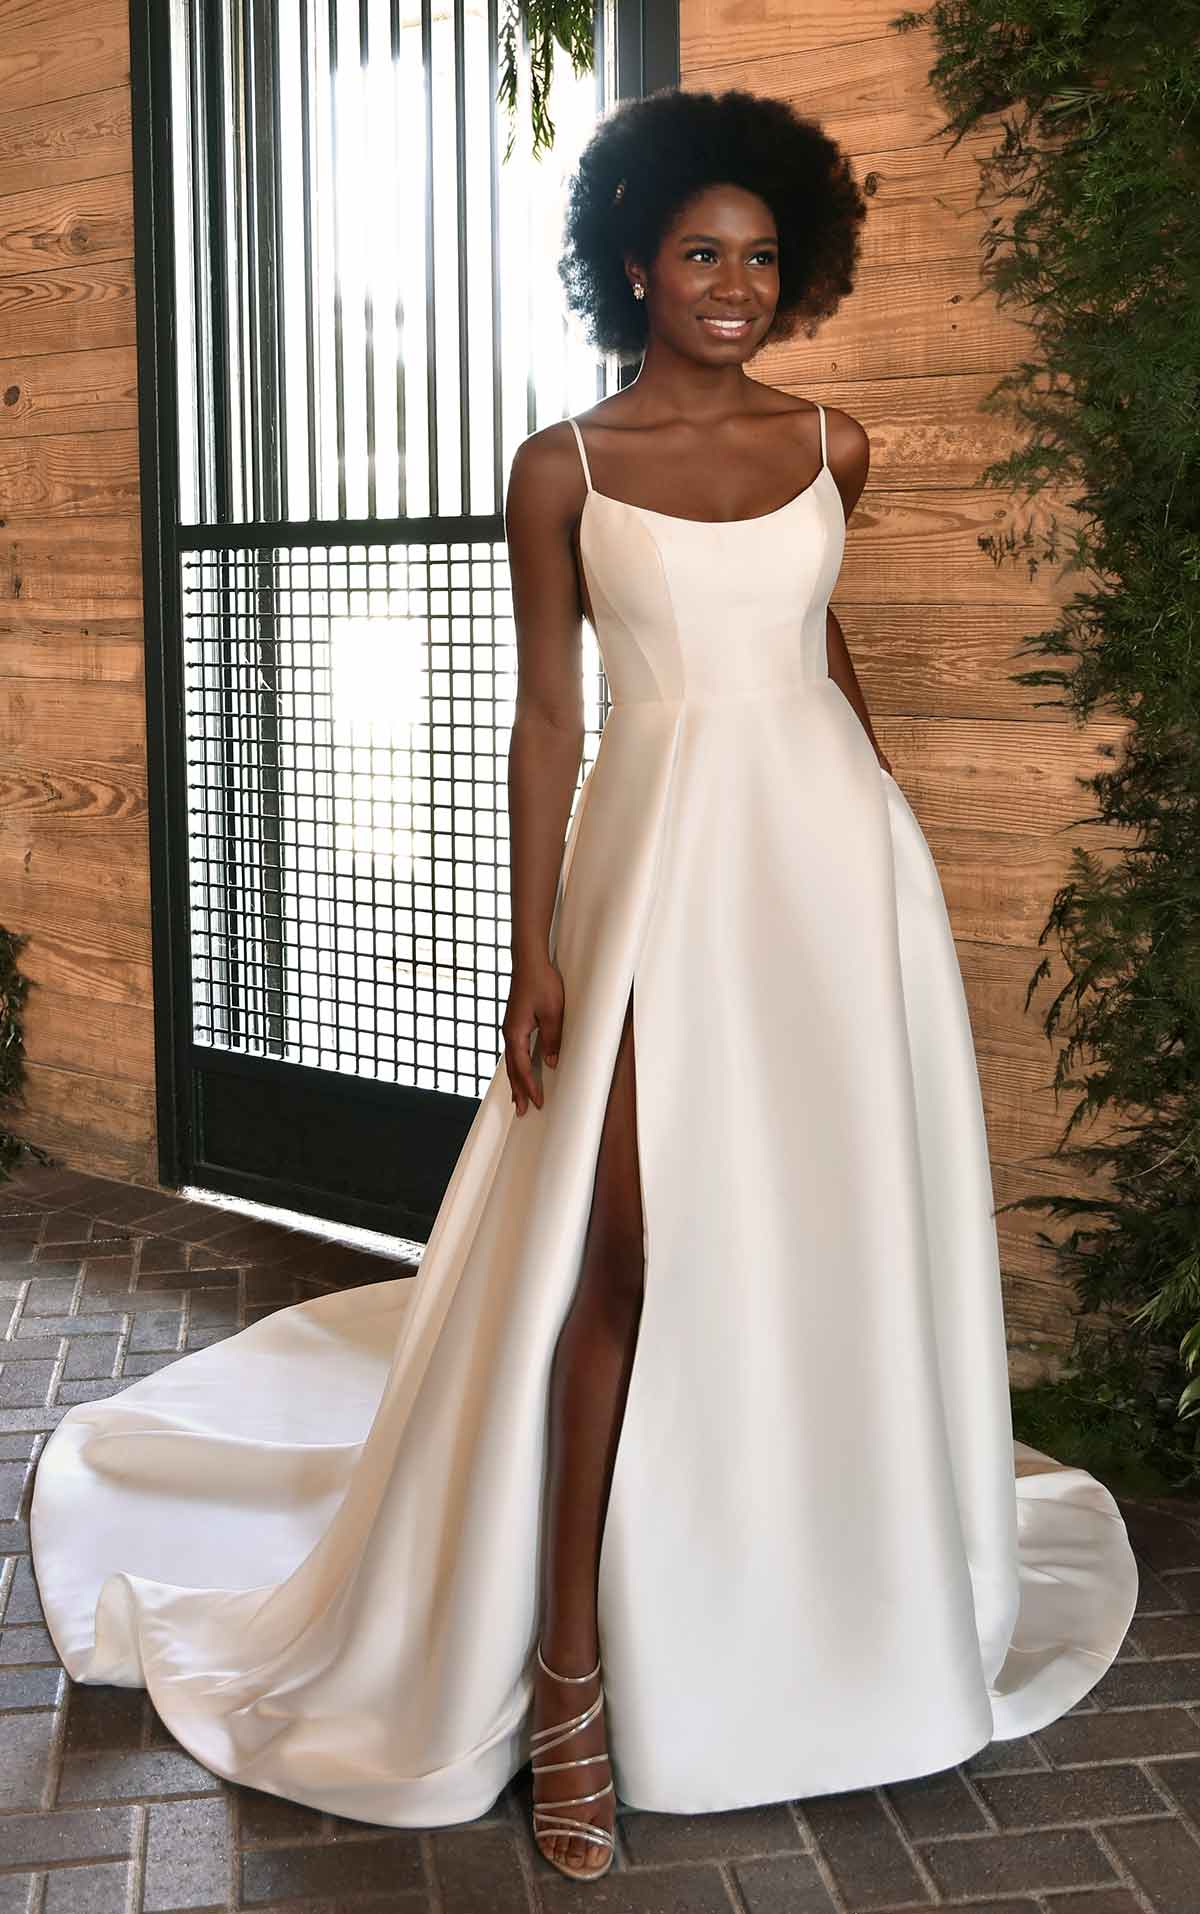 Classic A-Line Wedding Dress With Scoop Neck And Front Slit | Kleinfeld  Bridal